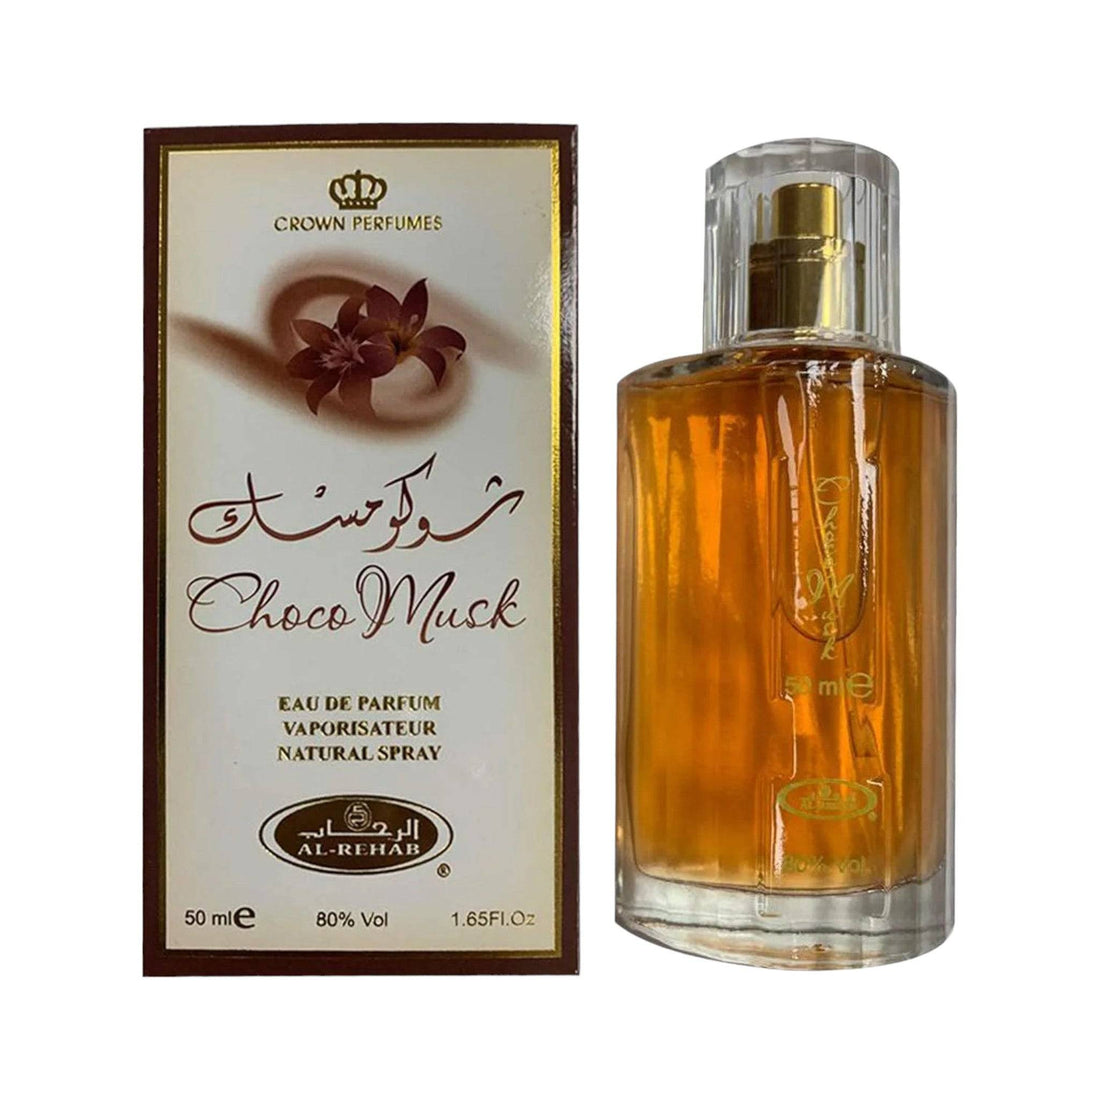 Stylish bottle of Choco Musk Eau De Parfum by Al Rehab, displaying its amber-colored juice, ideal for chocolate scent lovers.